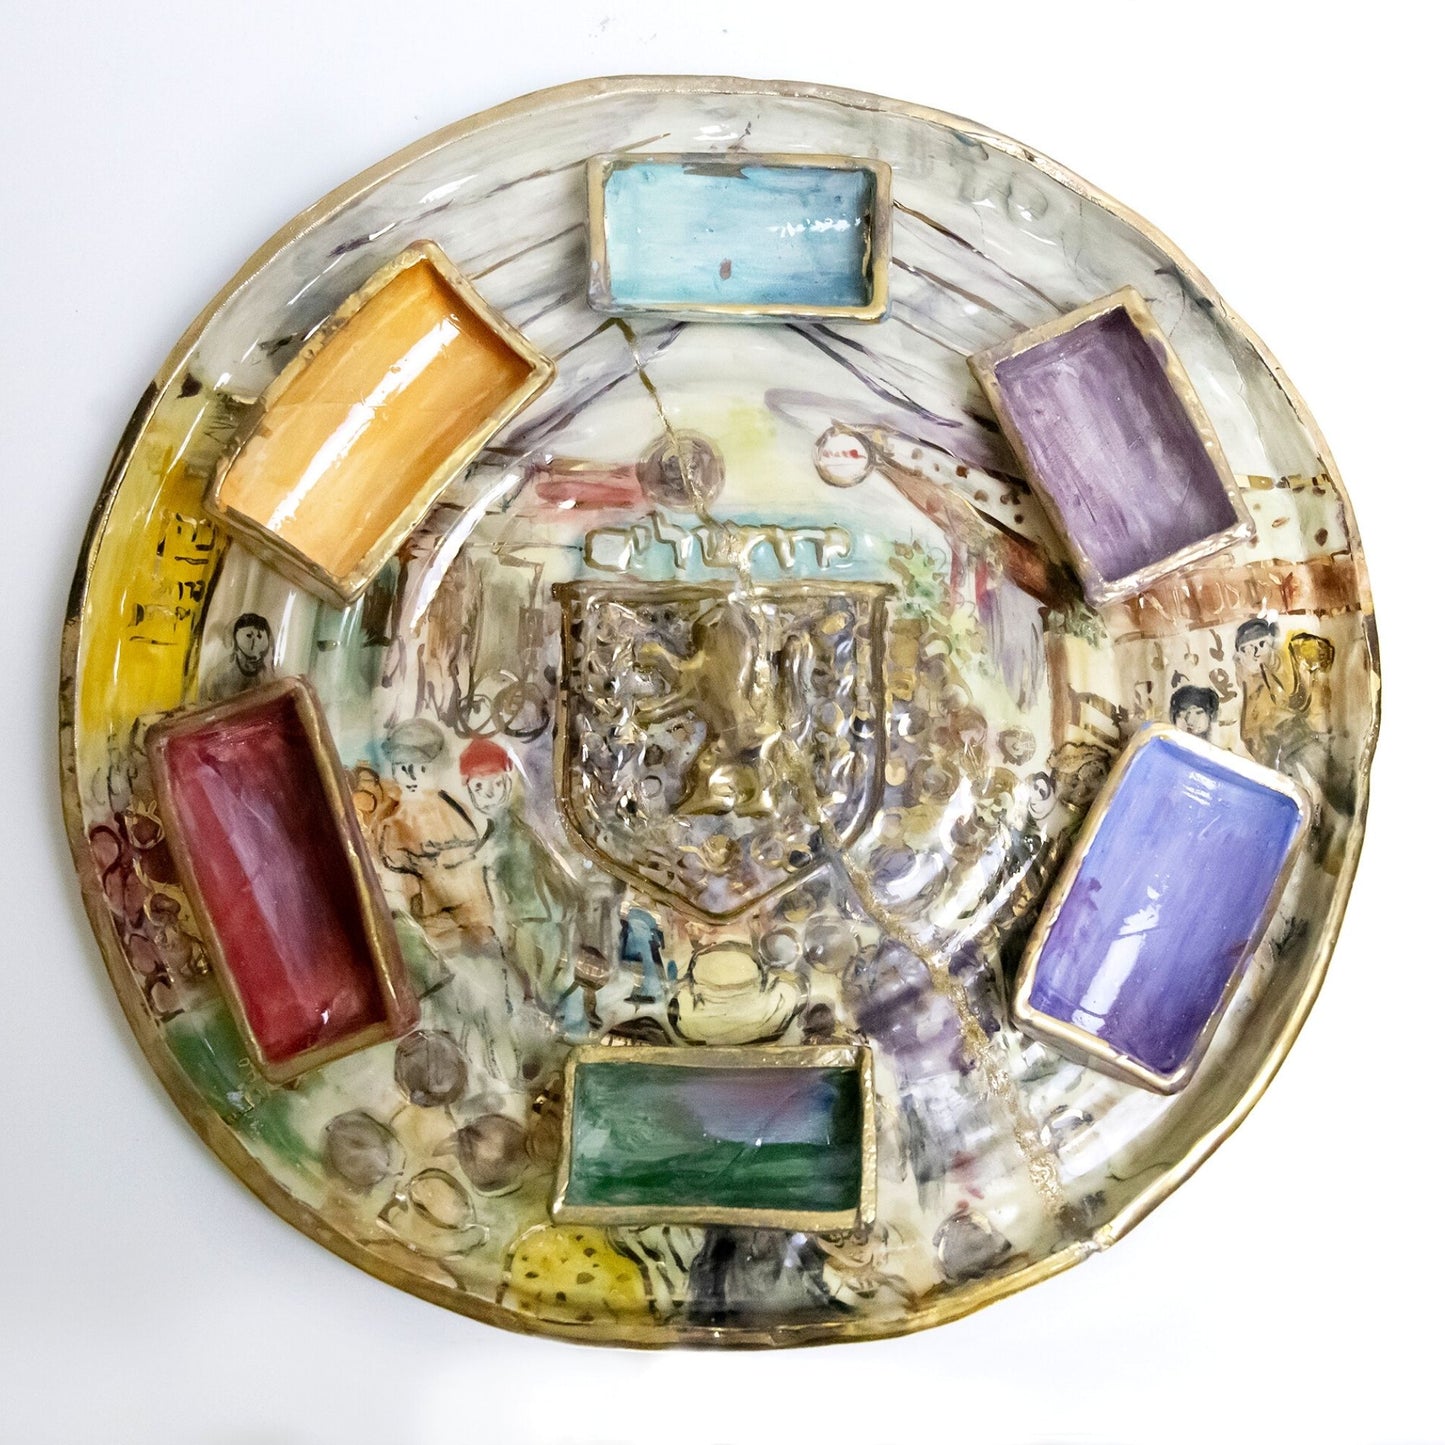 The Shuk Passover Seder Plate Set